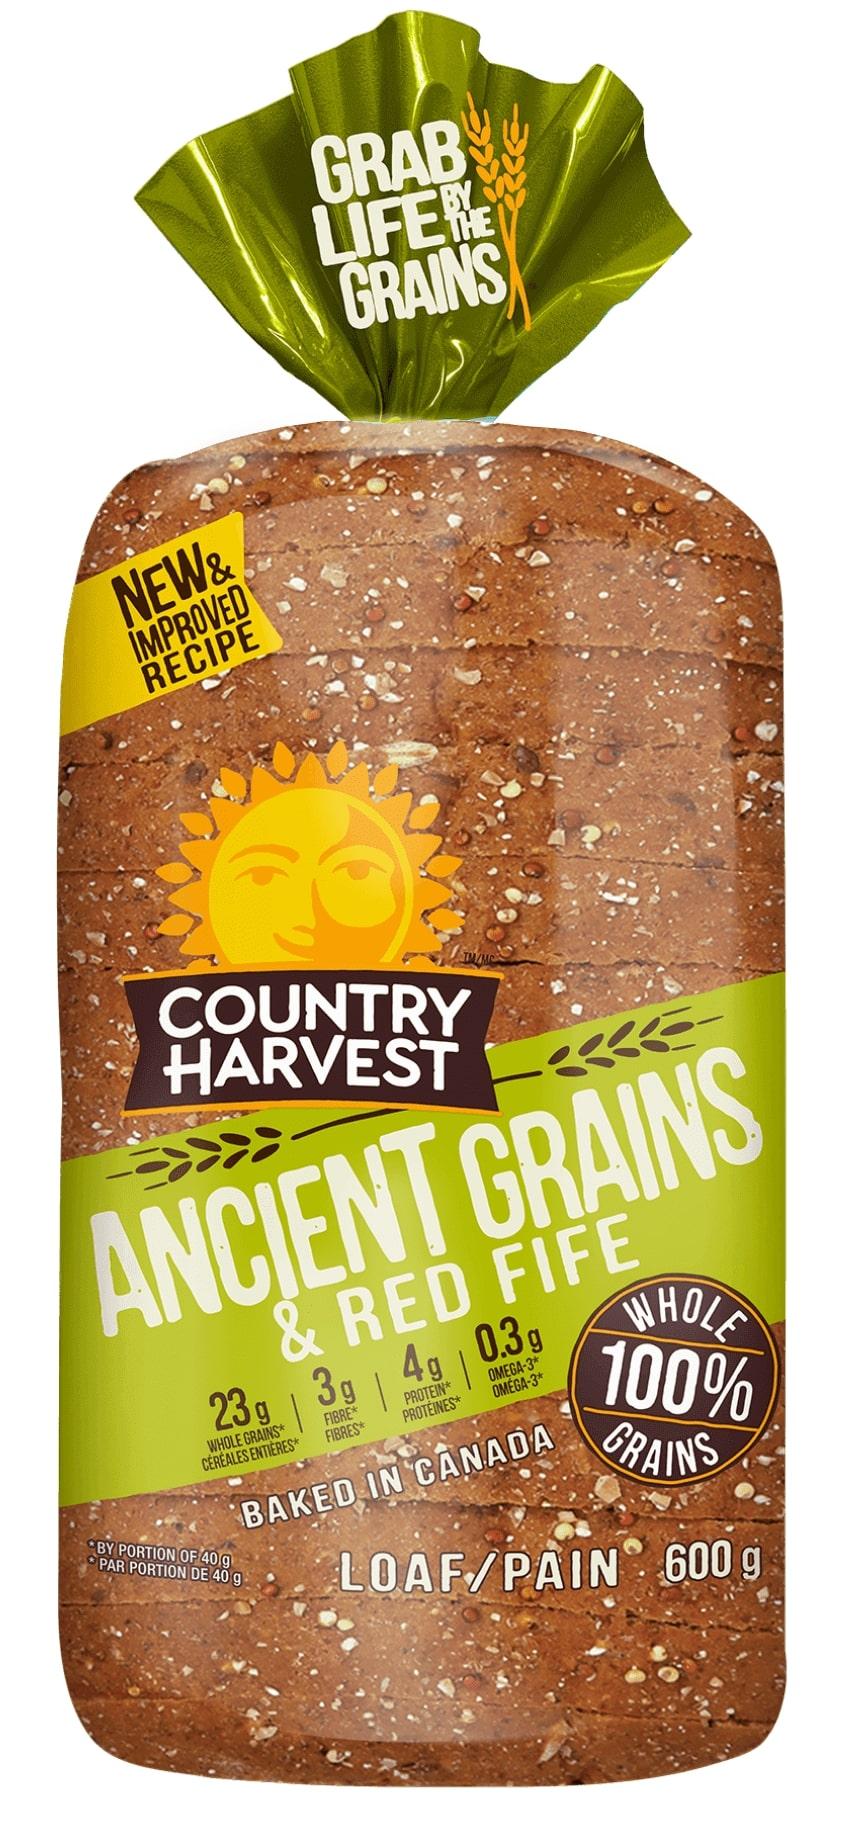 country-harvest-ancient-grains-red-fife-bread